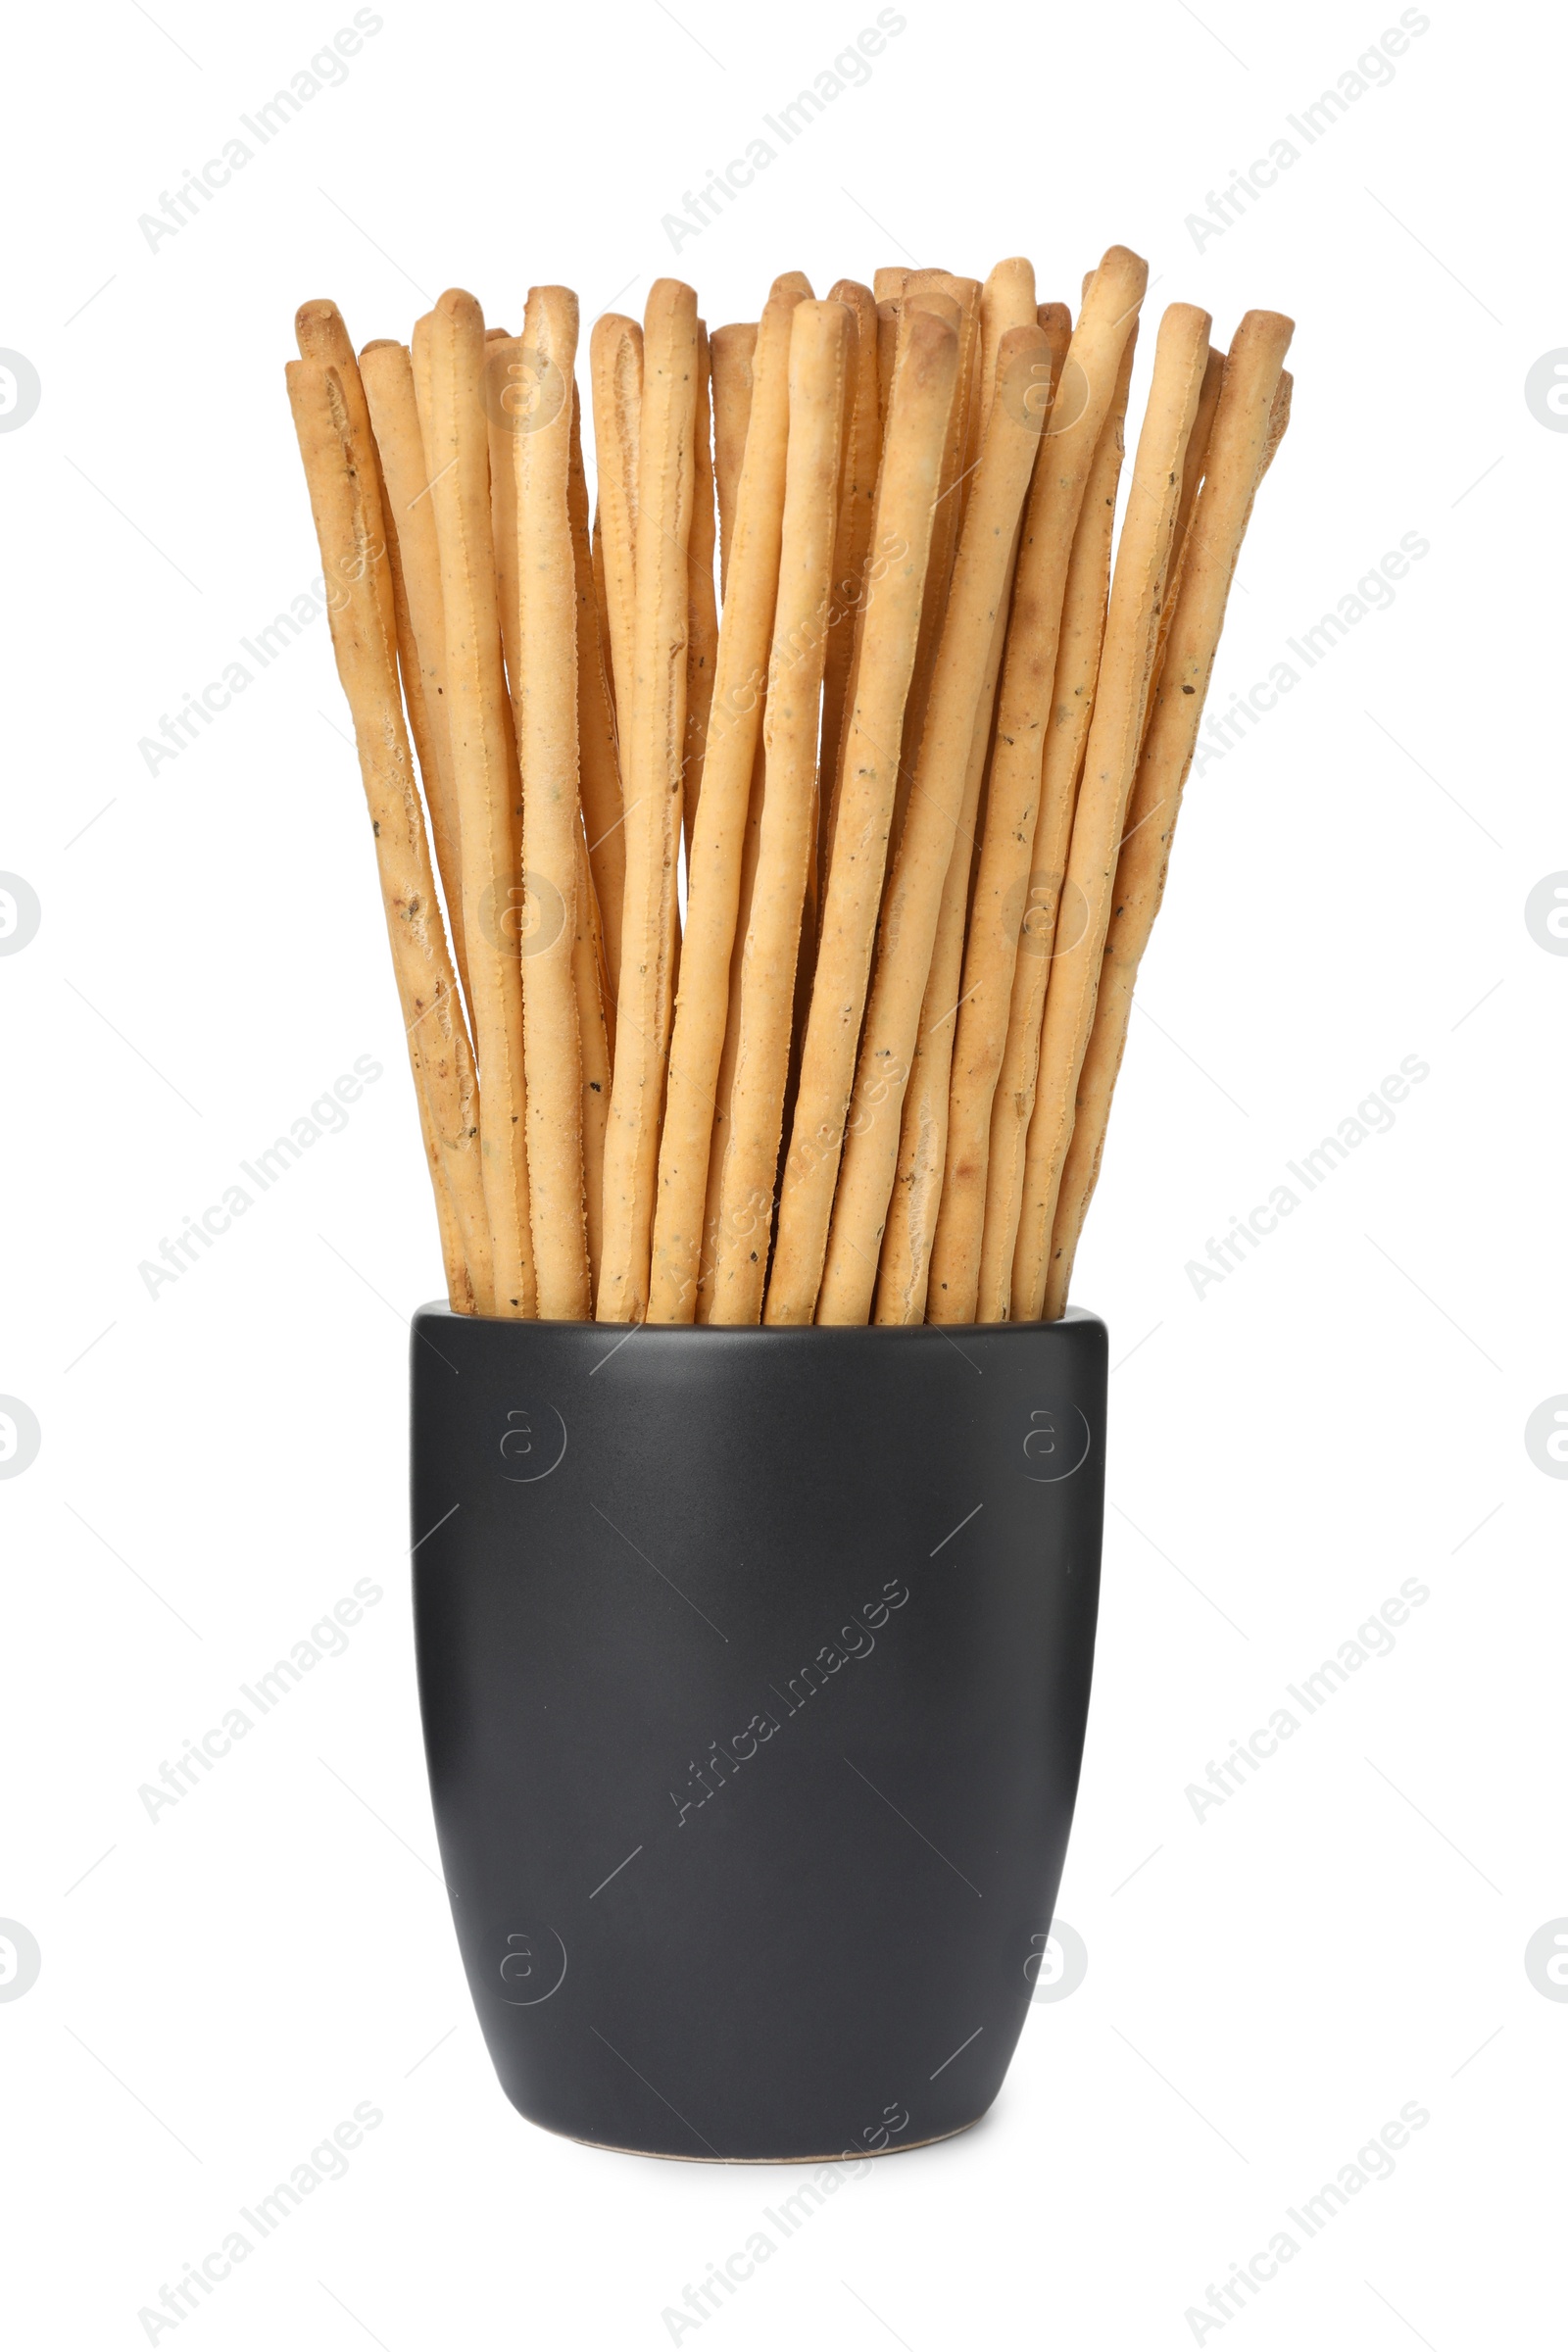 Photo of Delicious grissini sticks in cup on white background